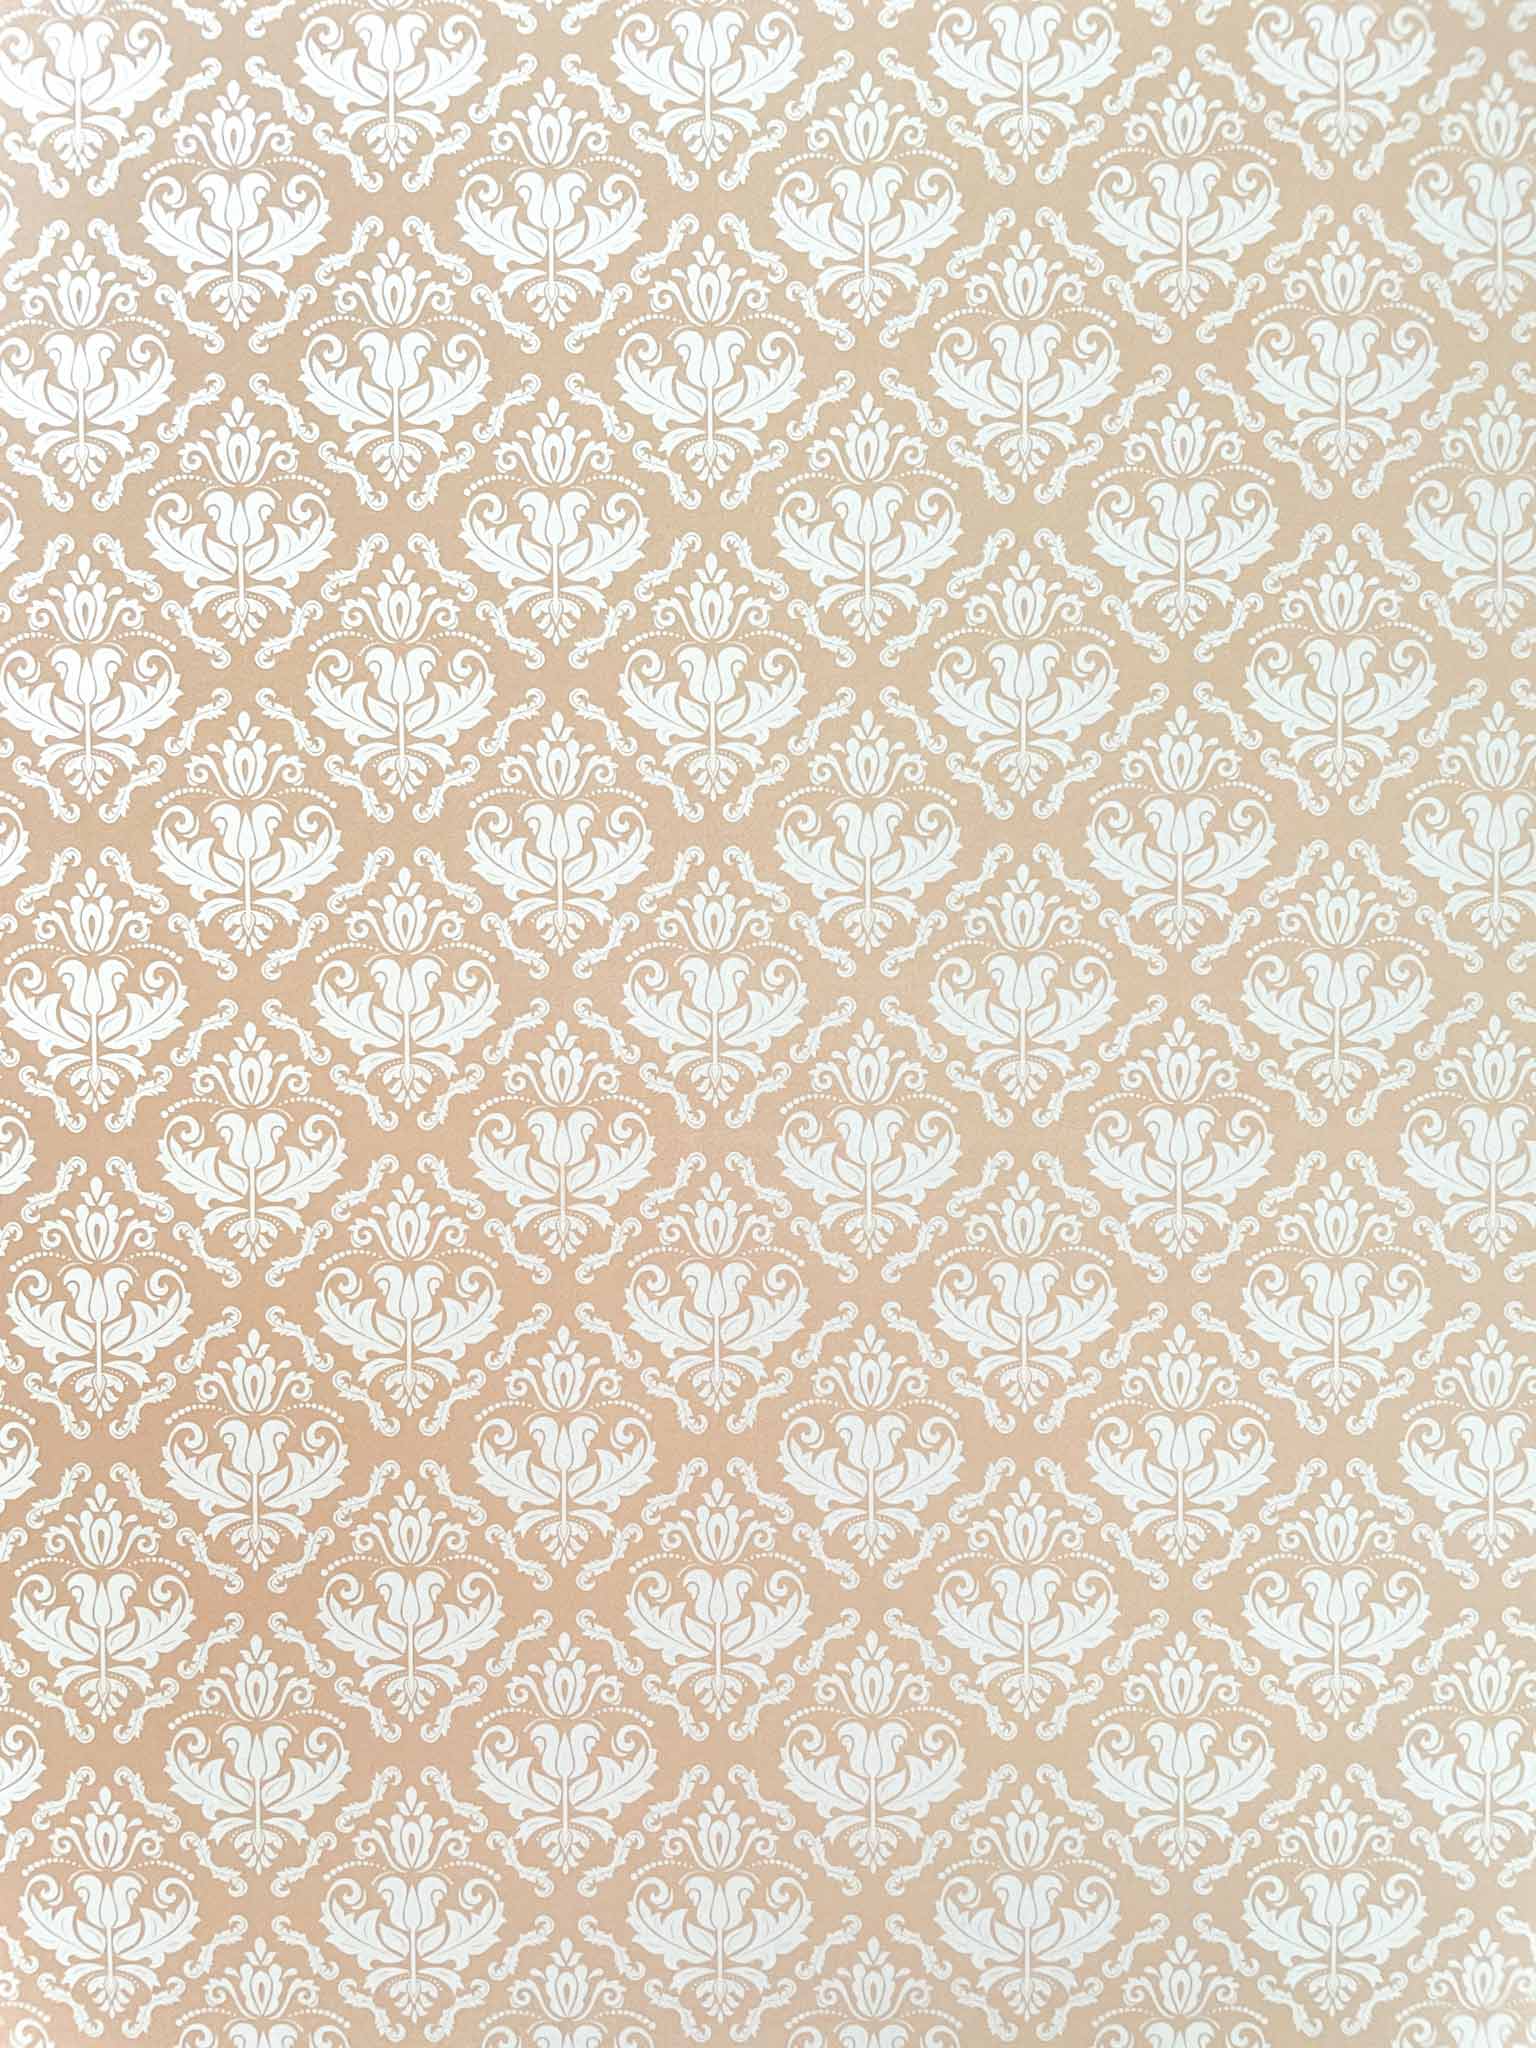 Amlie-decorative-craft-paper-in-beige-and-white